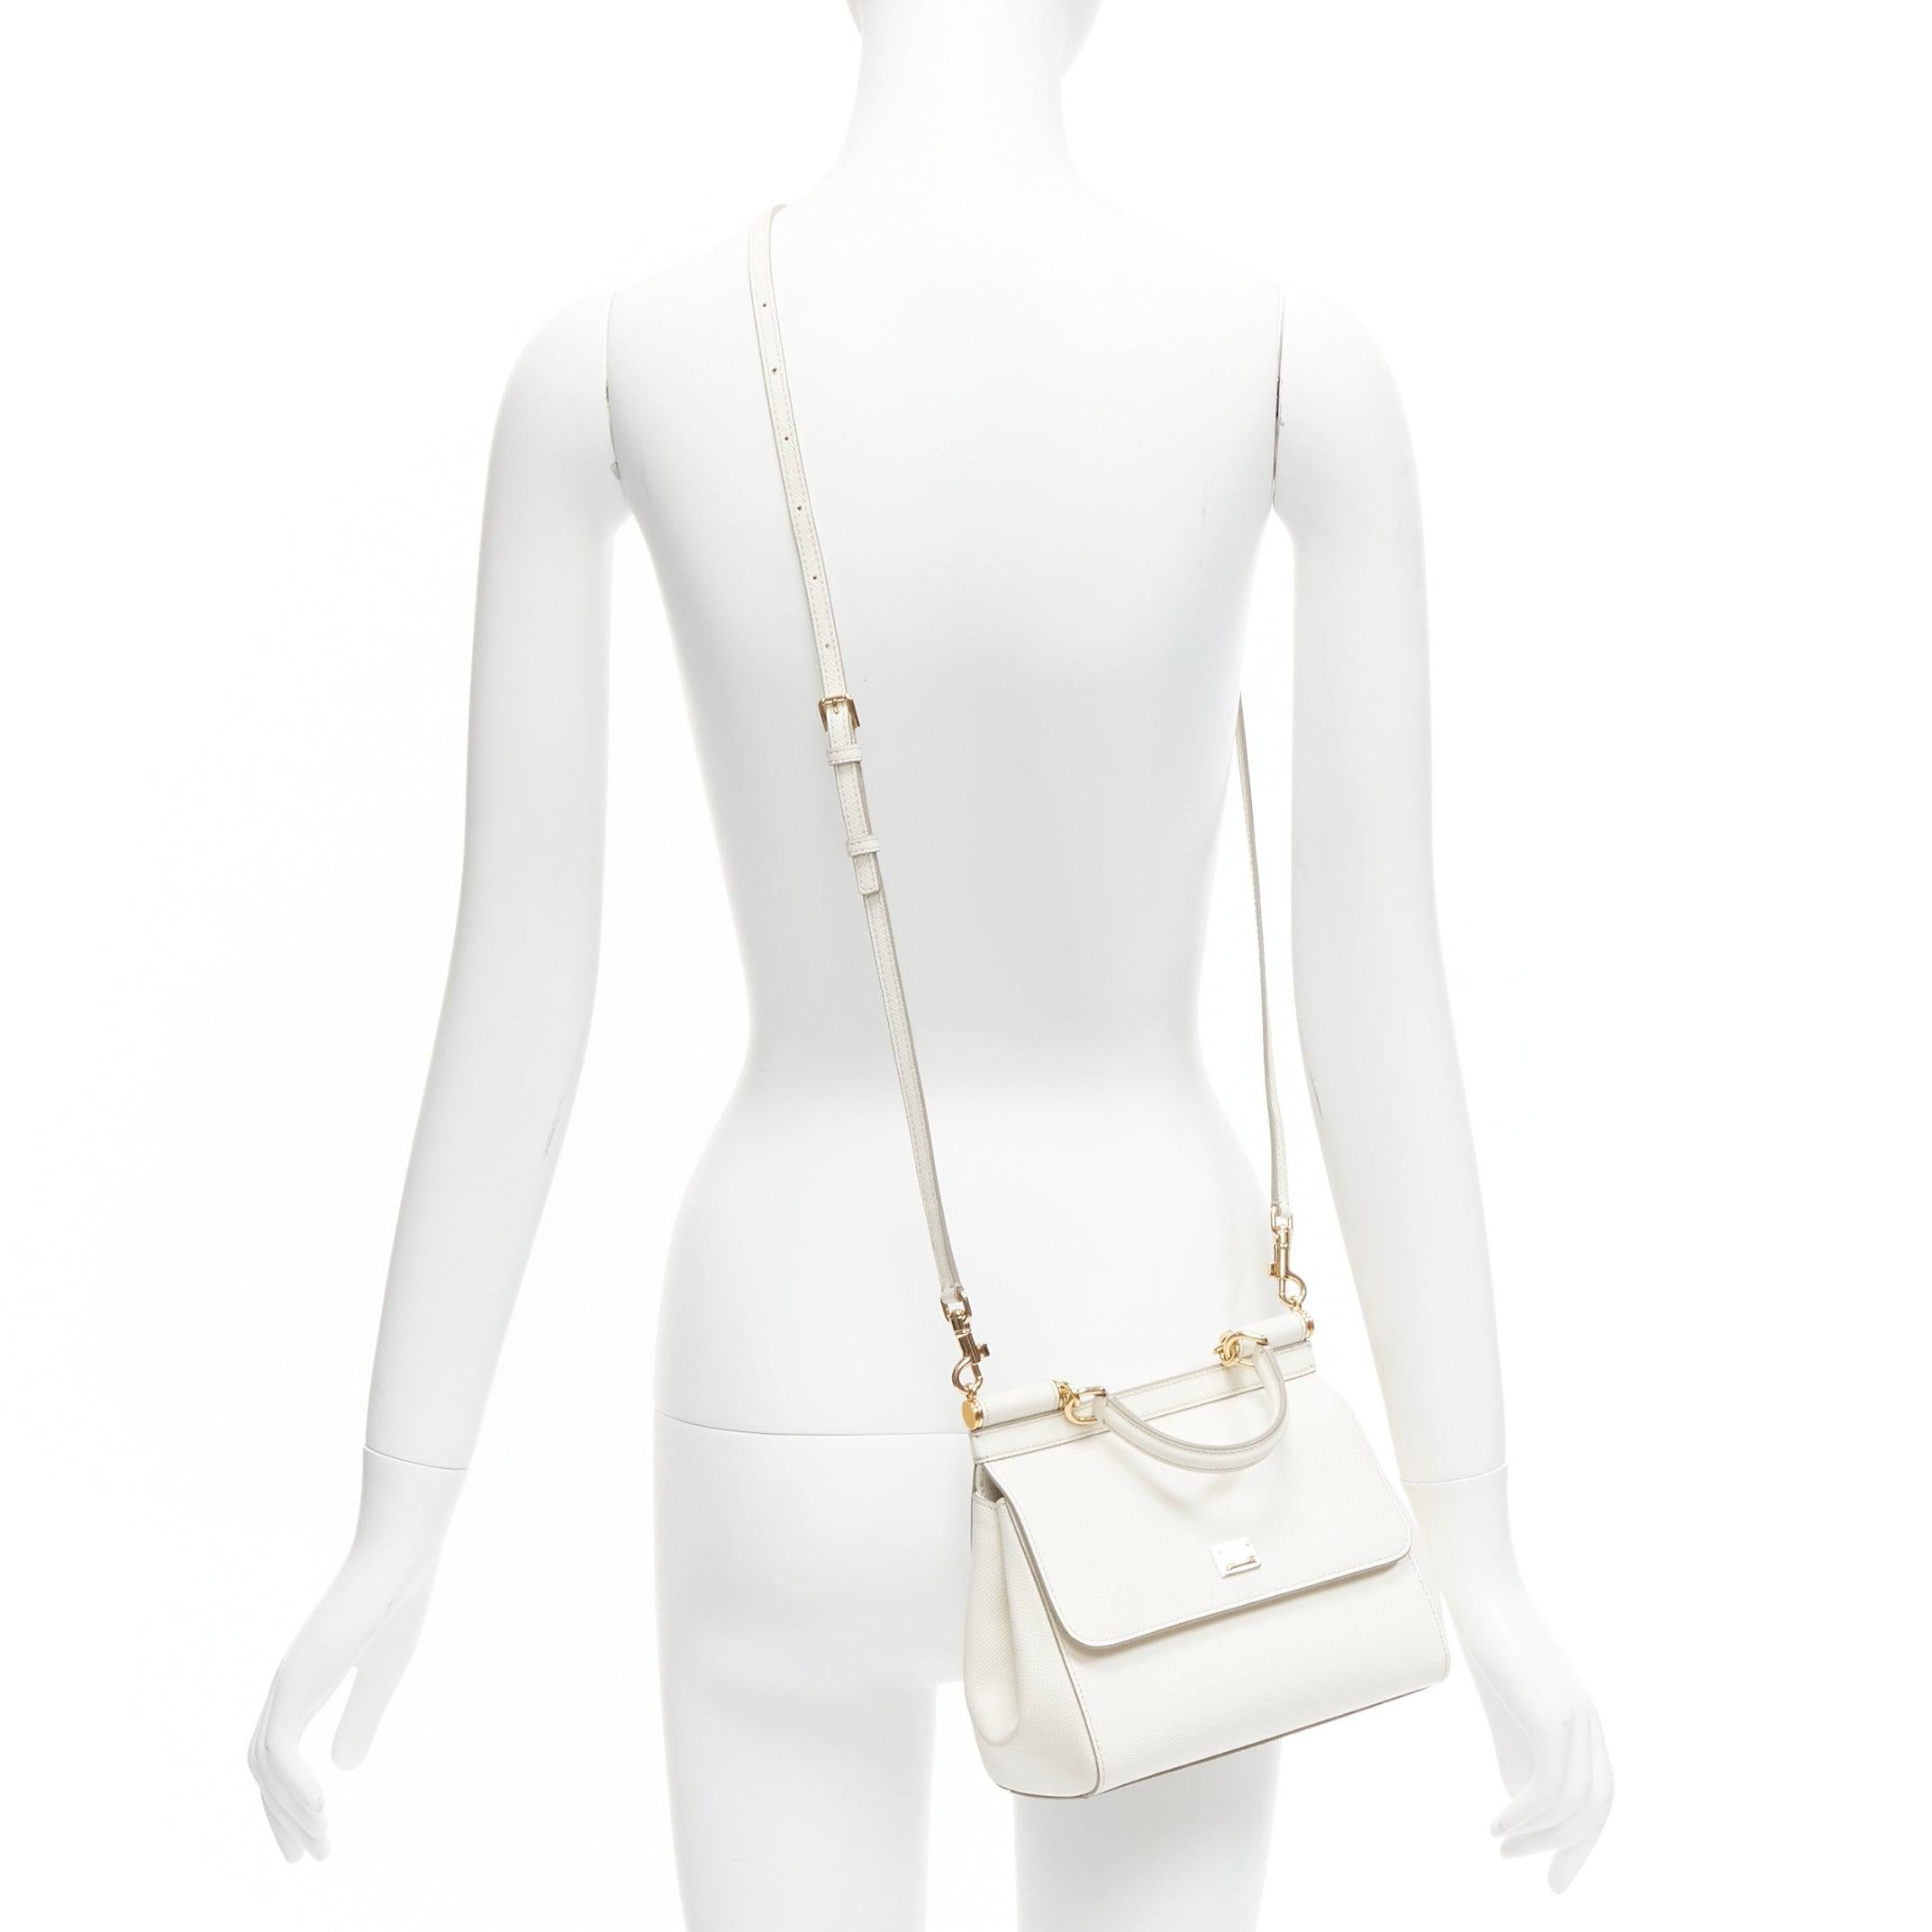 DOLCE GABBANA Sicily Small white leather top handle flap crossbody bag
Reference: TGAS/D00776
Brand: Dolce Gabbana
Designer: Domenico Dolce and Stefano Gabbana
Model: Sicily
Material: Leather
Color: White
Pattern: Solid
Closure: Snap Buttons
Lining: